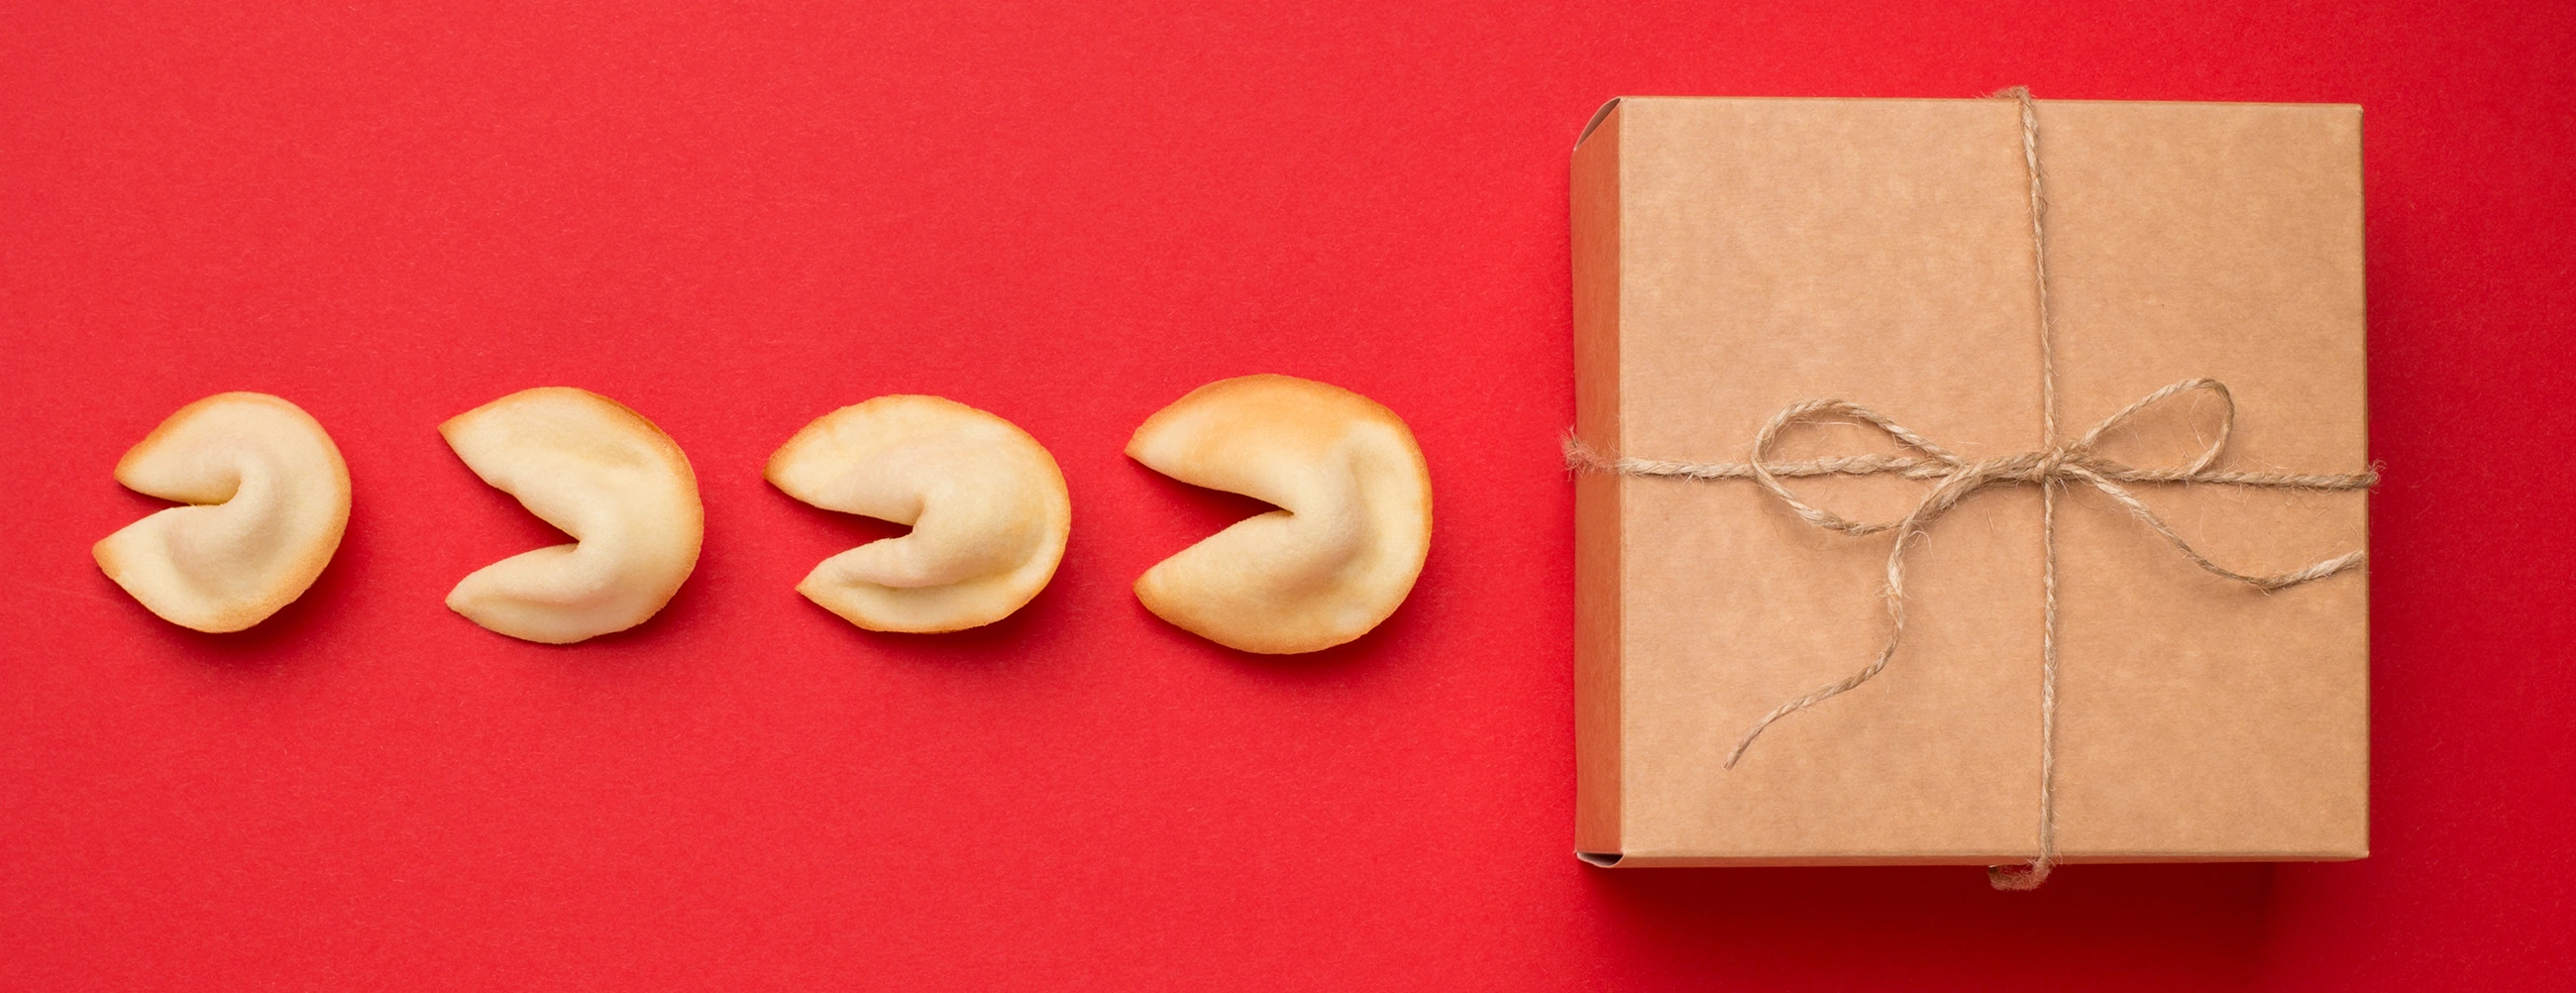 Recipe of the Month: Fortune Cookies